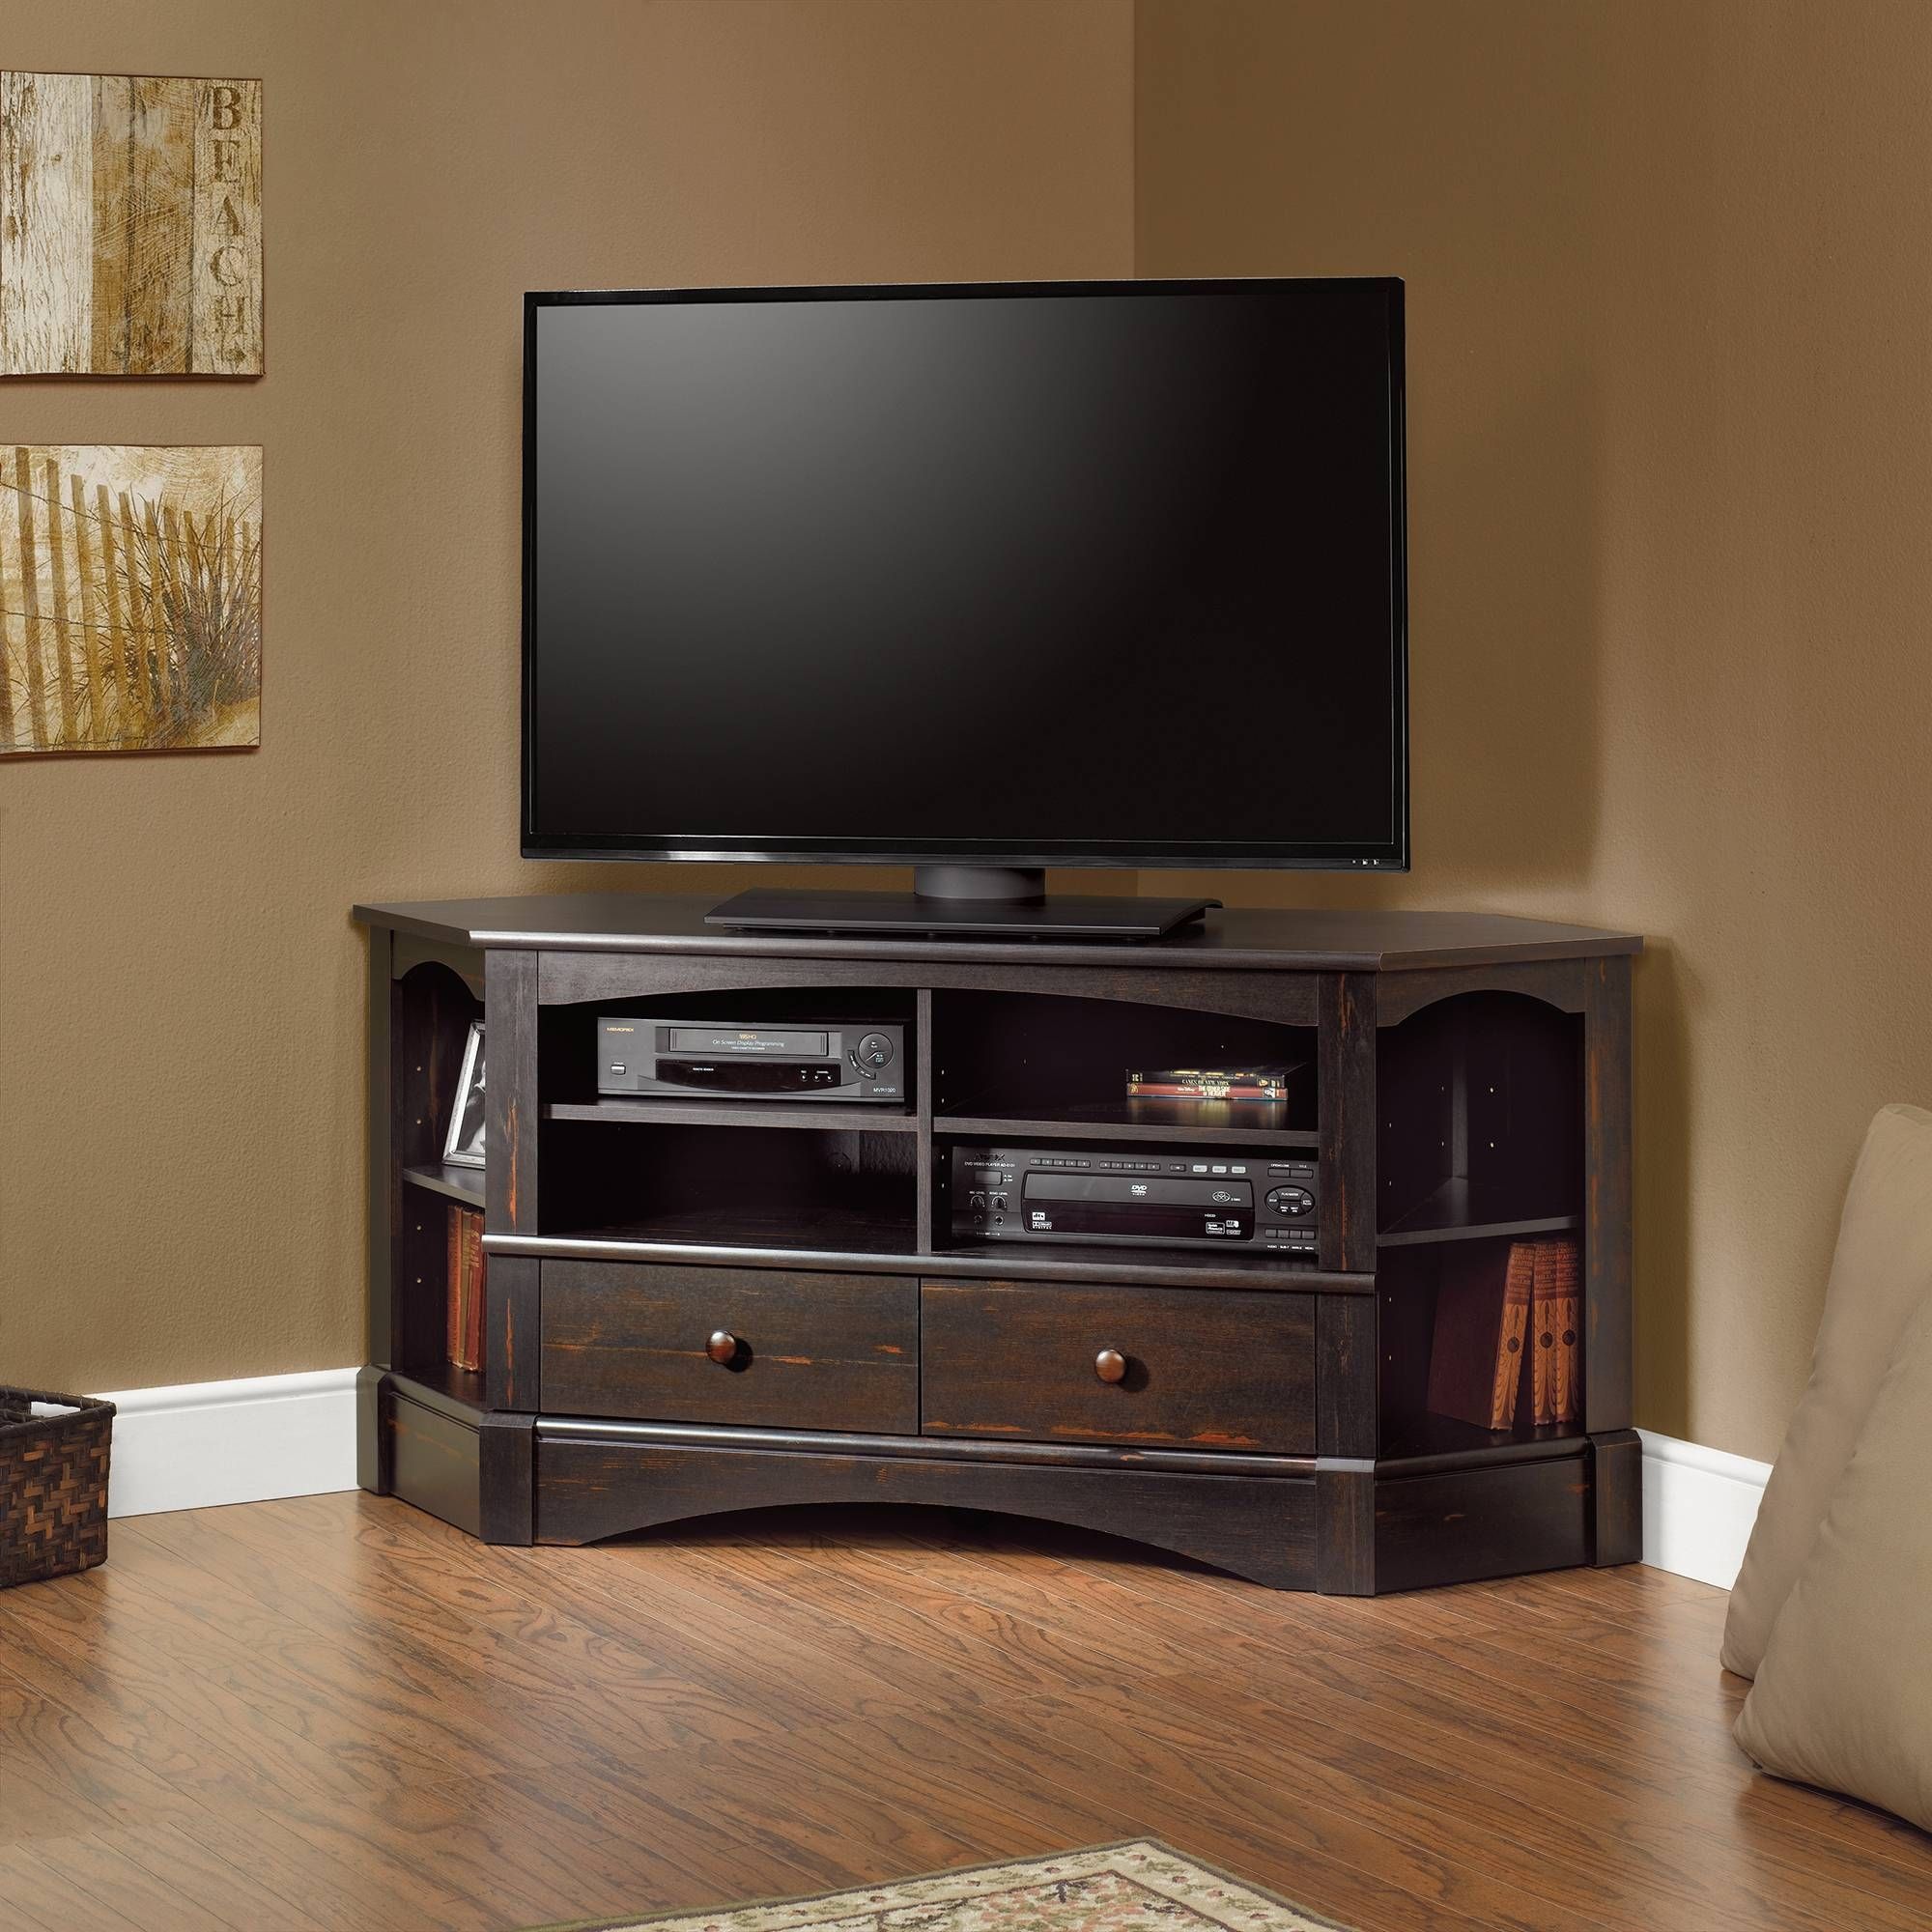 Harbor View | Corner Entertainment Credenza | 402902 | Sauder Within Real Wood Corner Tv Stands (View 2 of 15)